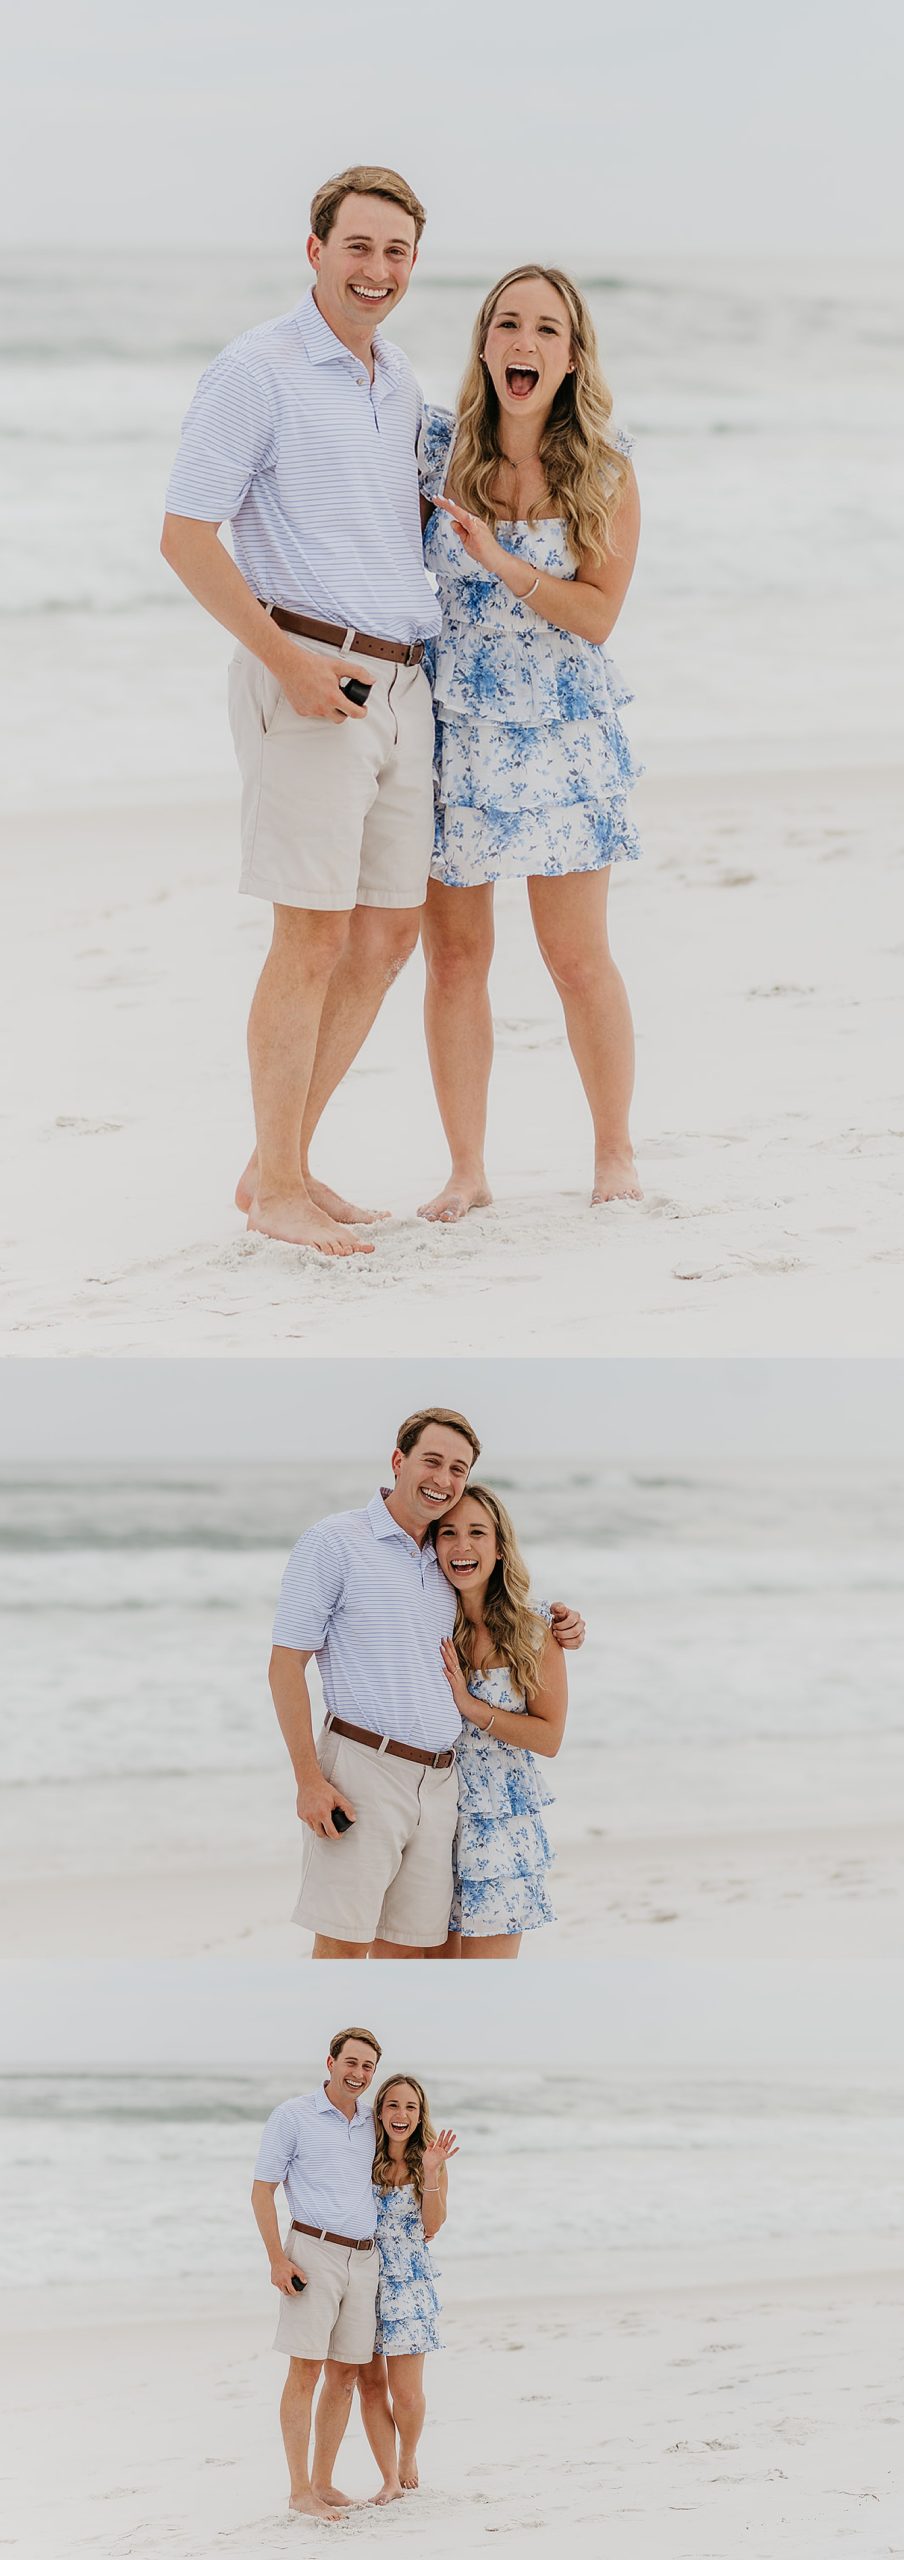 Woman sees 30A proposal photographer after beach surprise proposal from fiancé